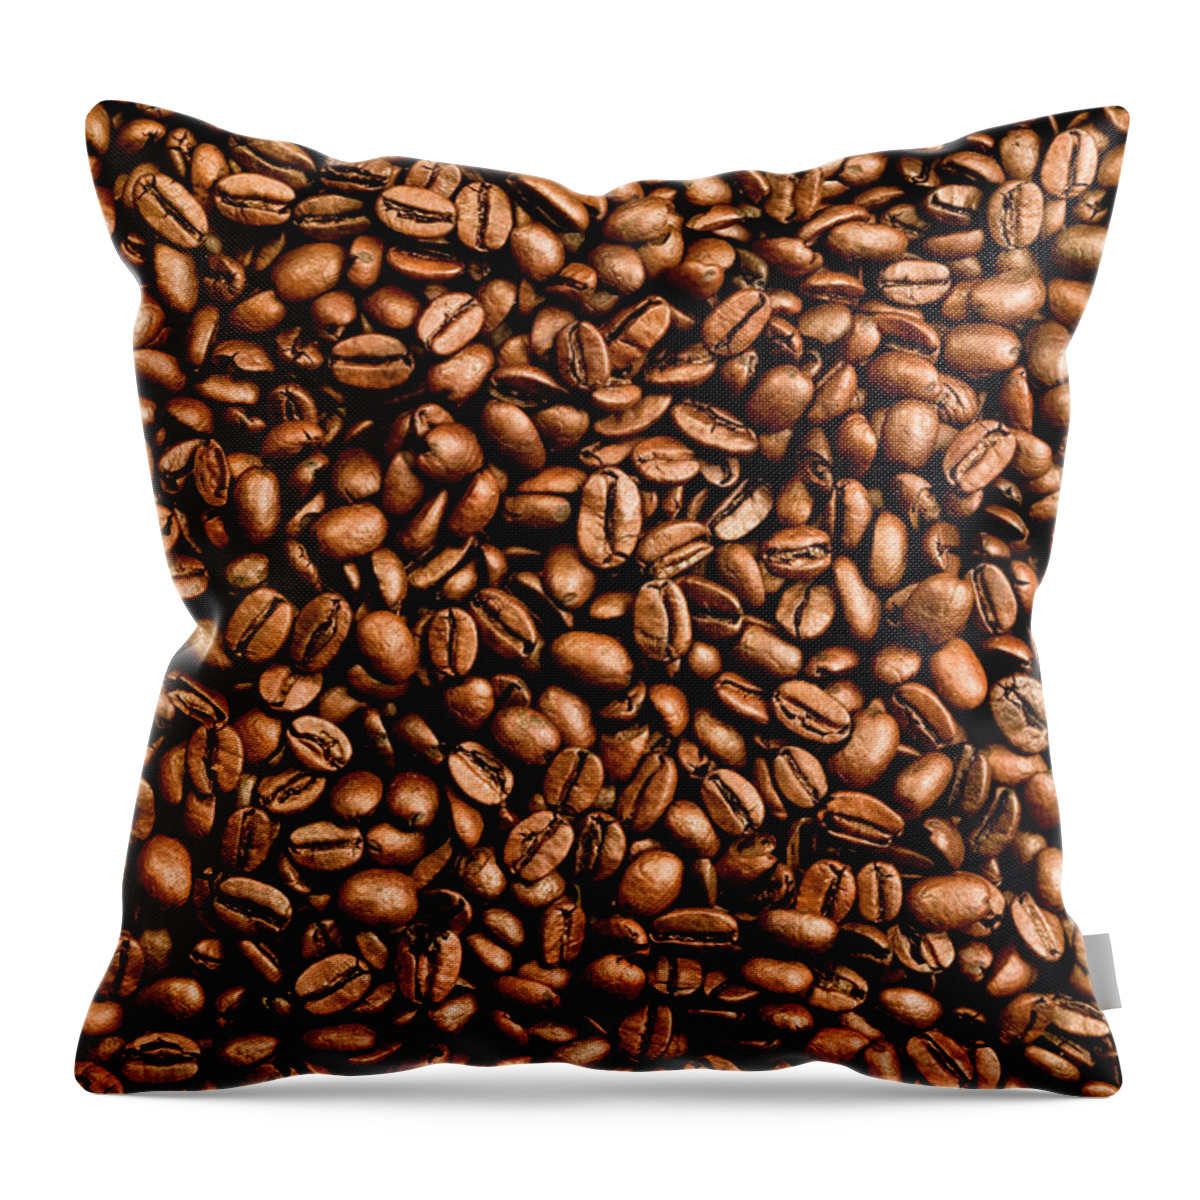 Large Group Of Objects Throw Pillow featuring the photograph Close Up Of Medium Roasted Coffee Beans by Lucidio Studio, Inc.